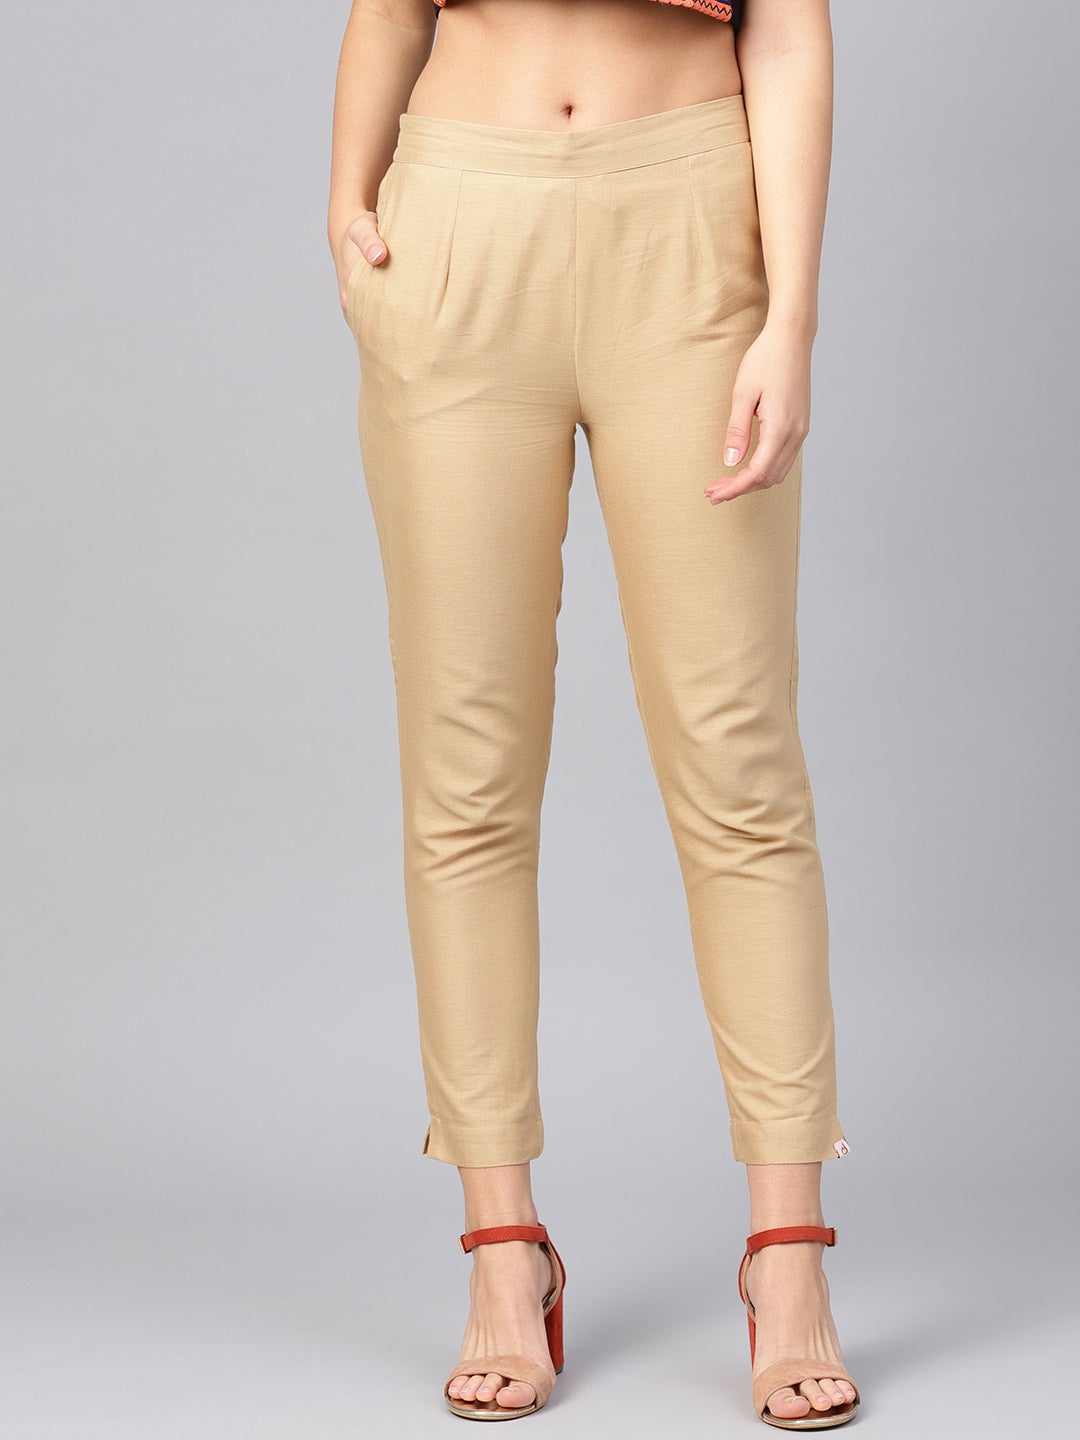 Juniper Gold Solid Cotton Flex Slim Fit Women Pants With Two Pockets